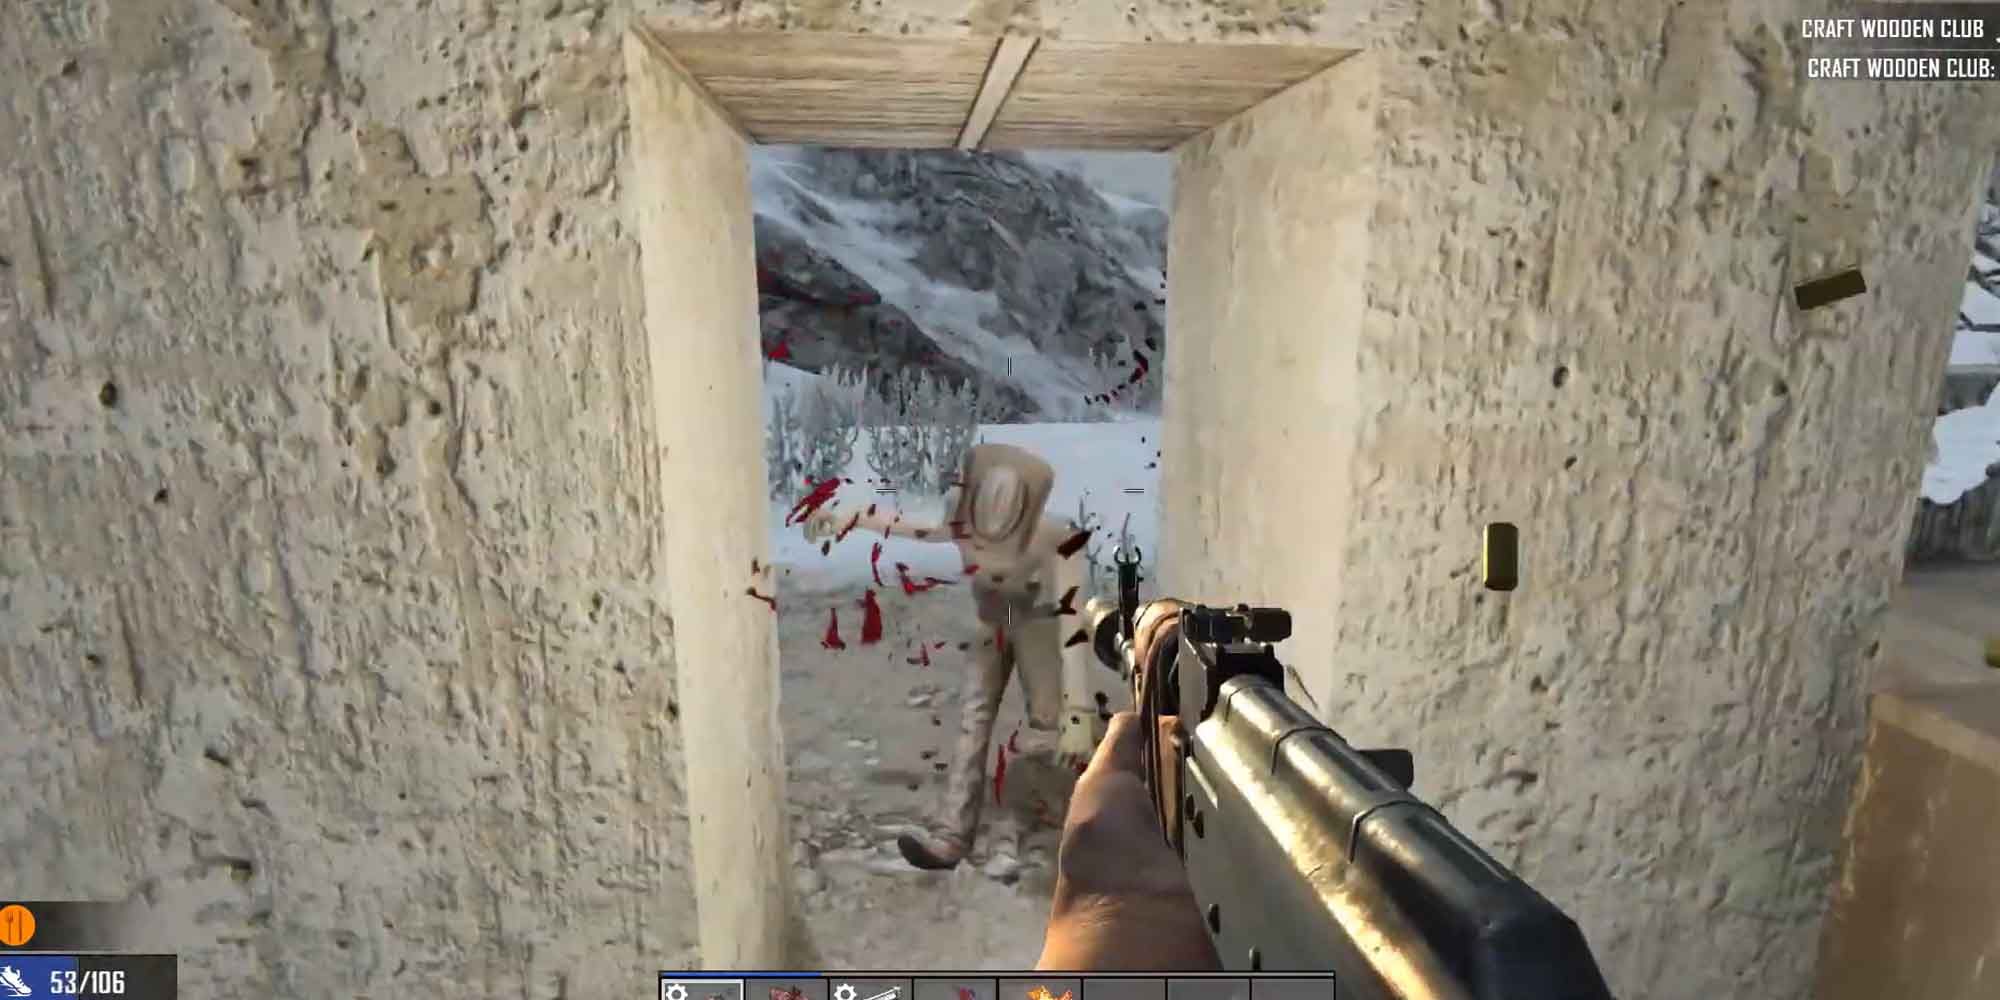 Defending the doorway with an AK47 in 7 Days to Die